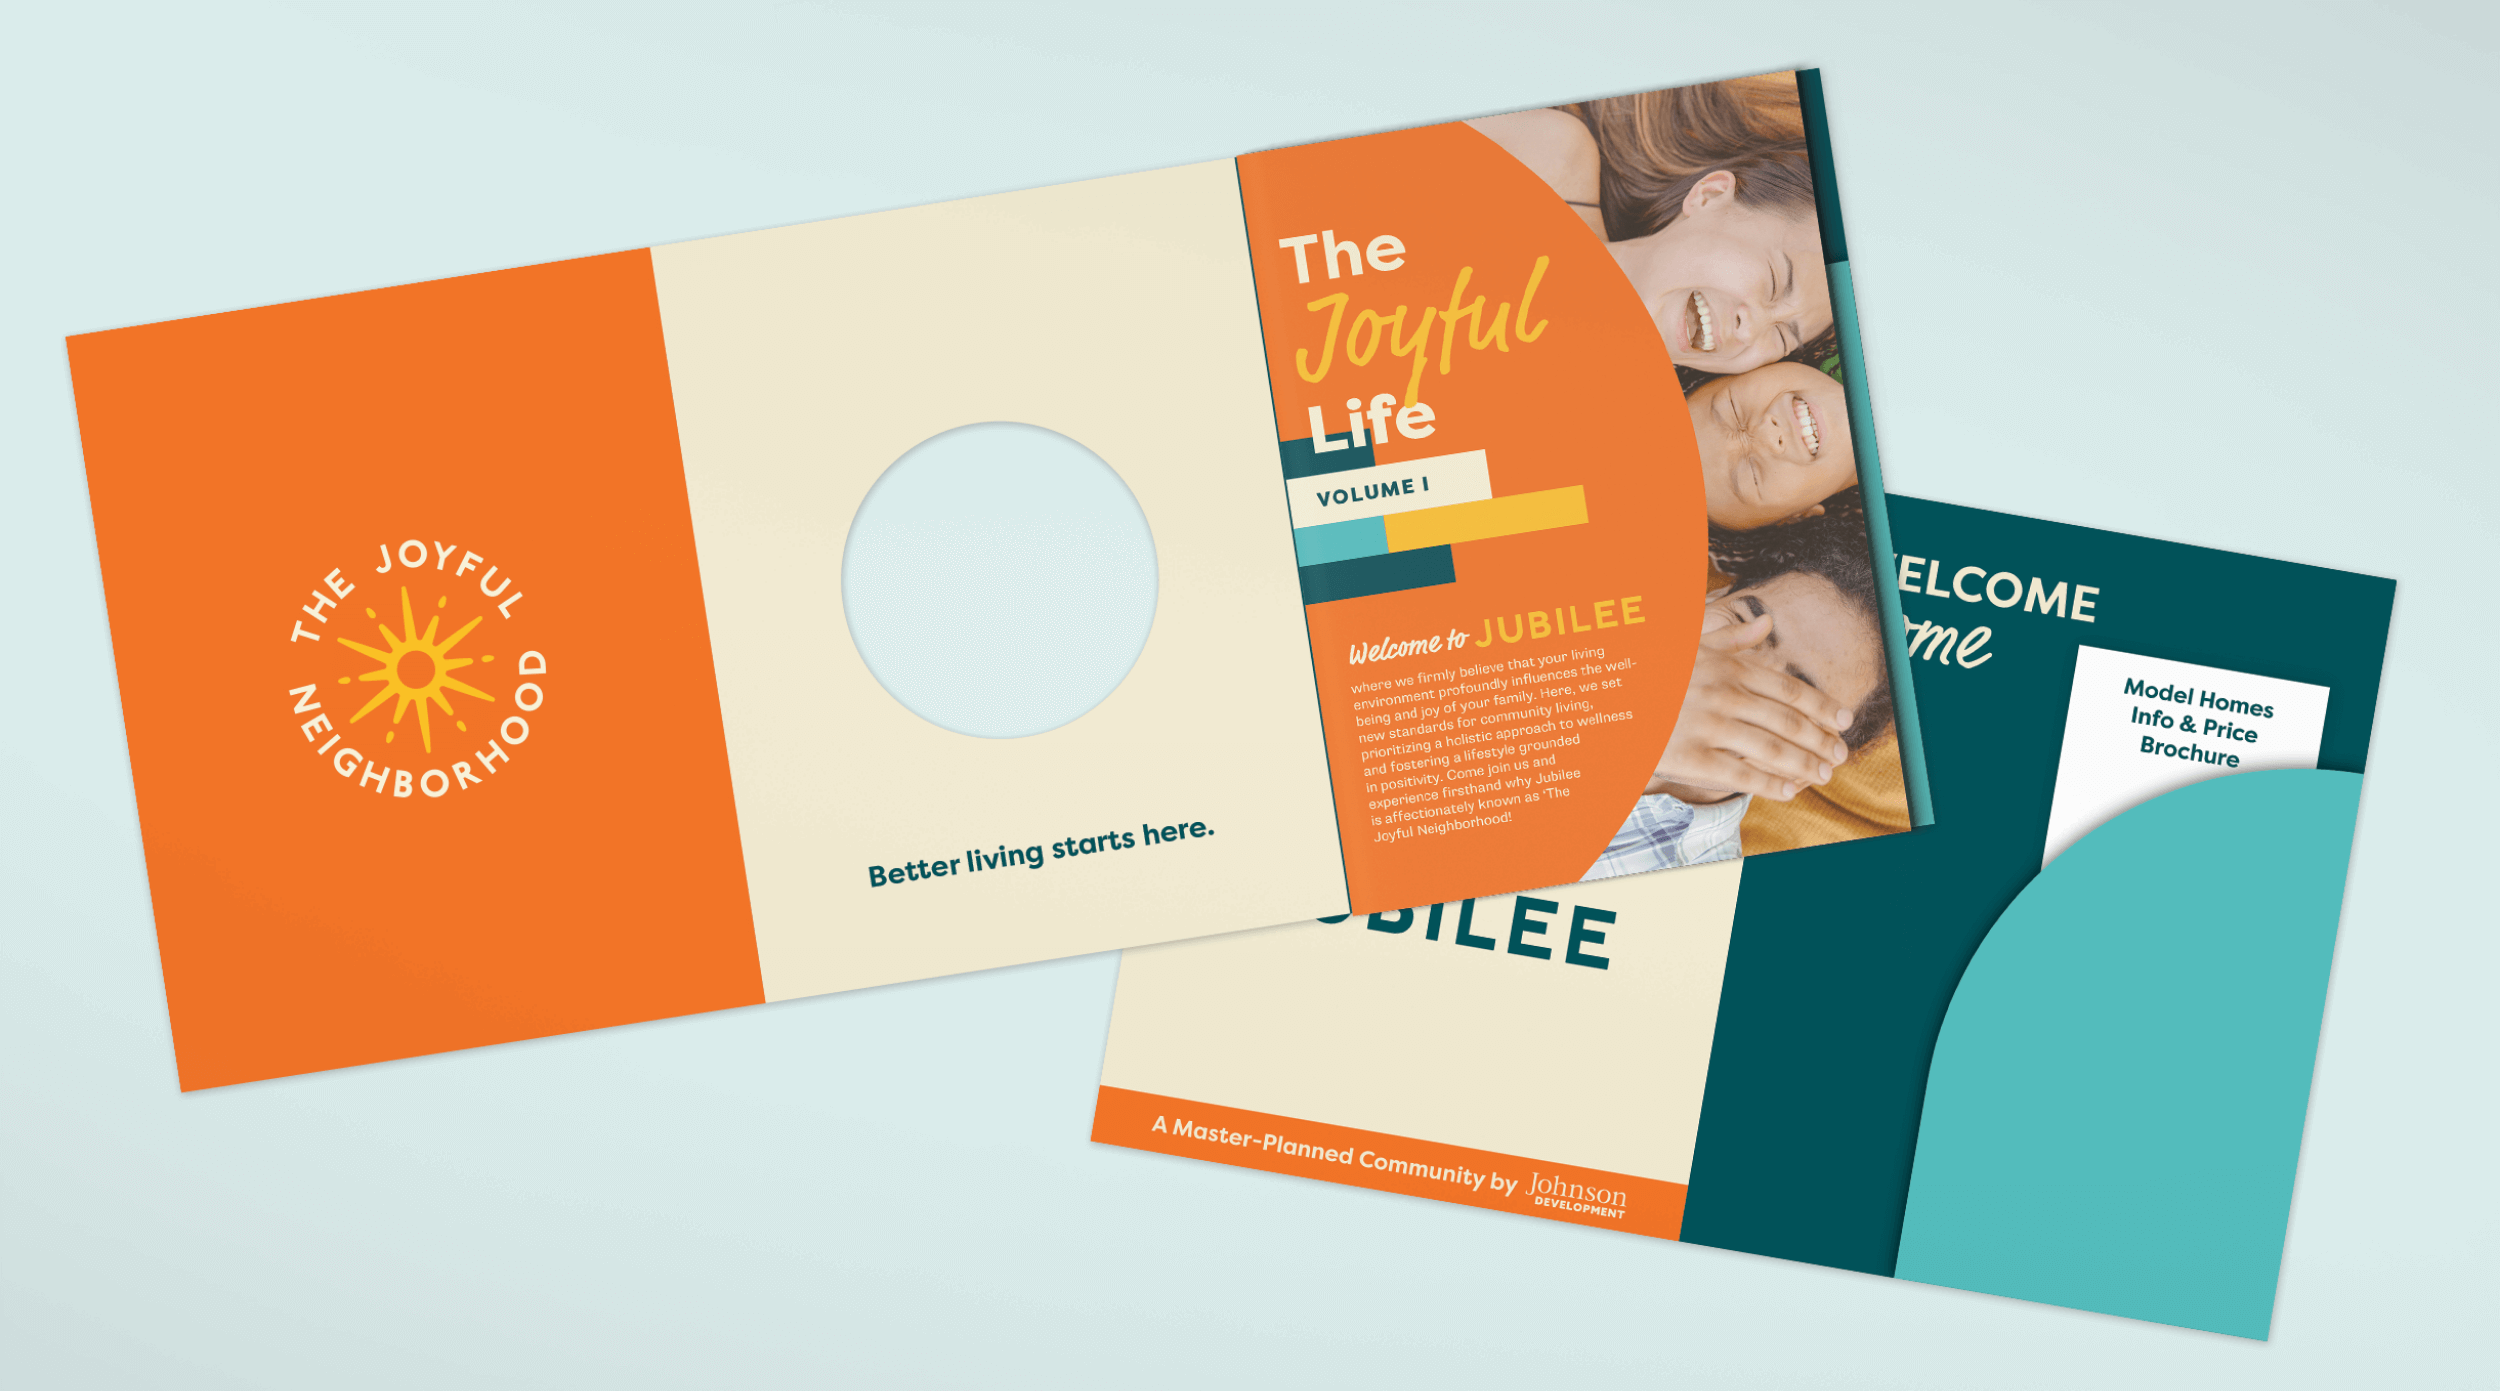 Jubilee custom folder and magazine created by ST8MNT as part of print collateral project for master-planned community in Texas